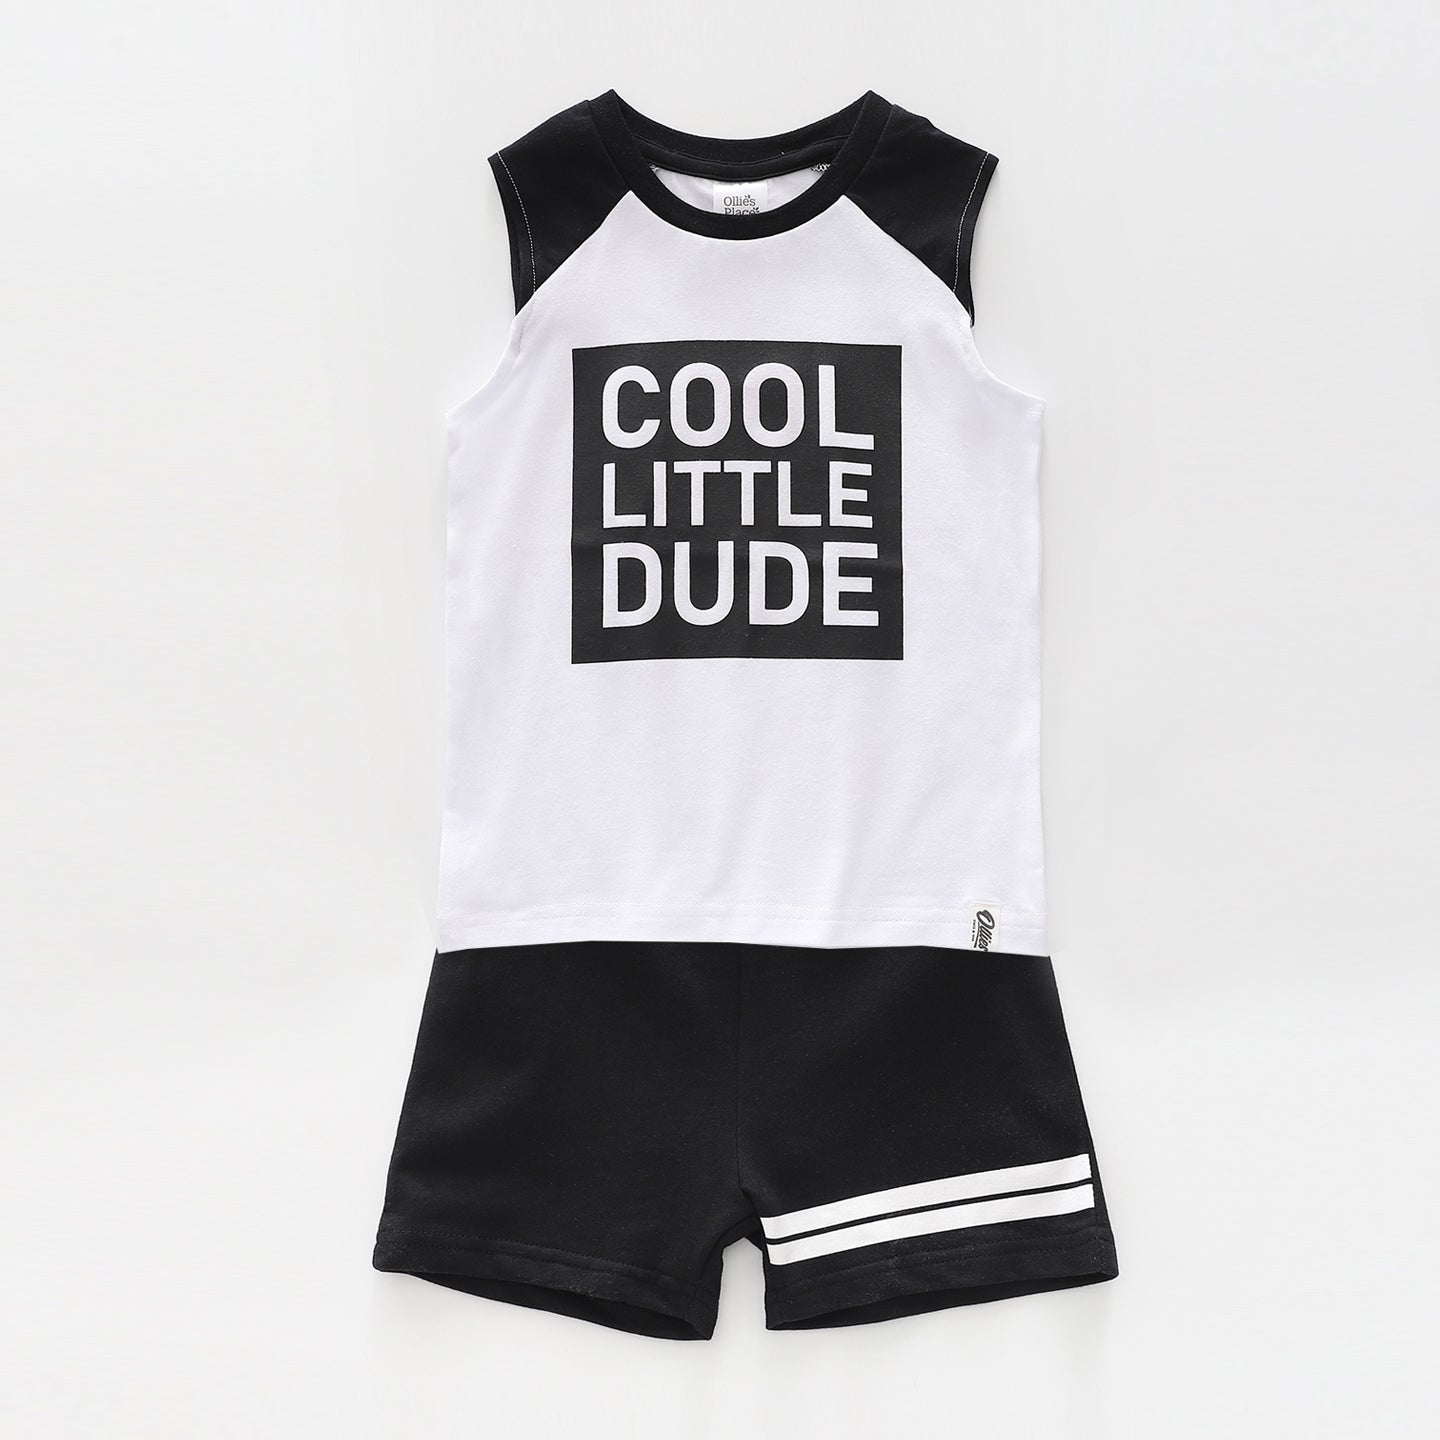 Boys Tee and Shorts Set - Cool Little Dude